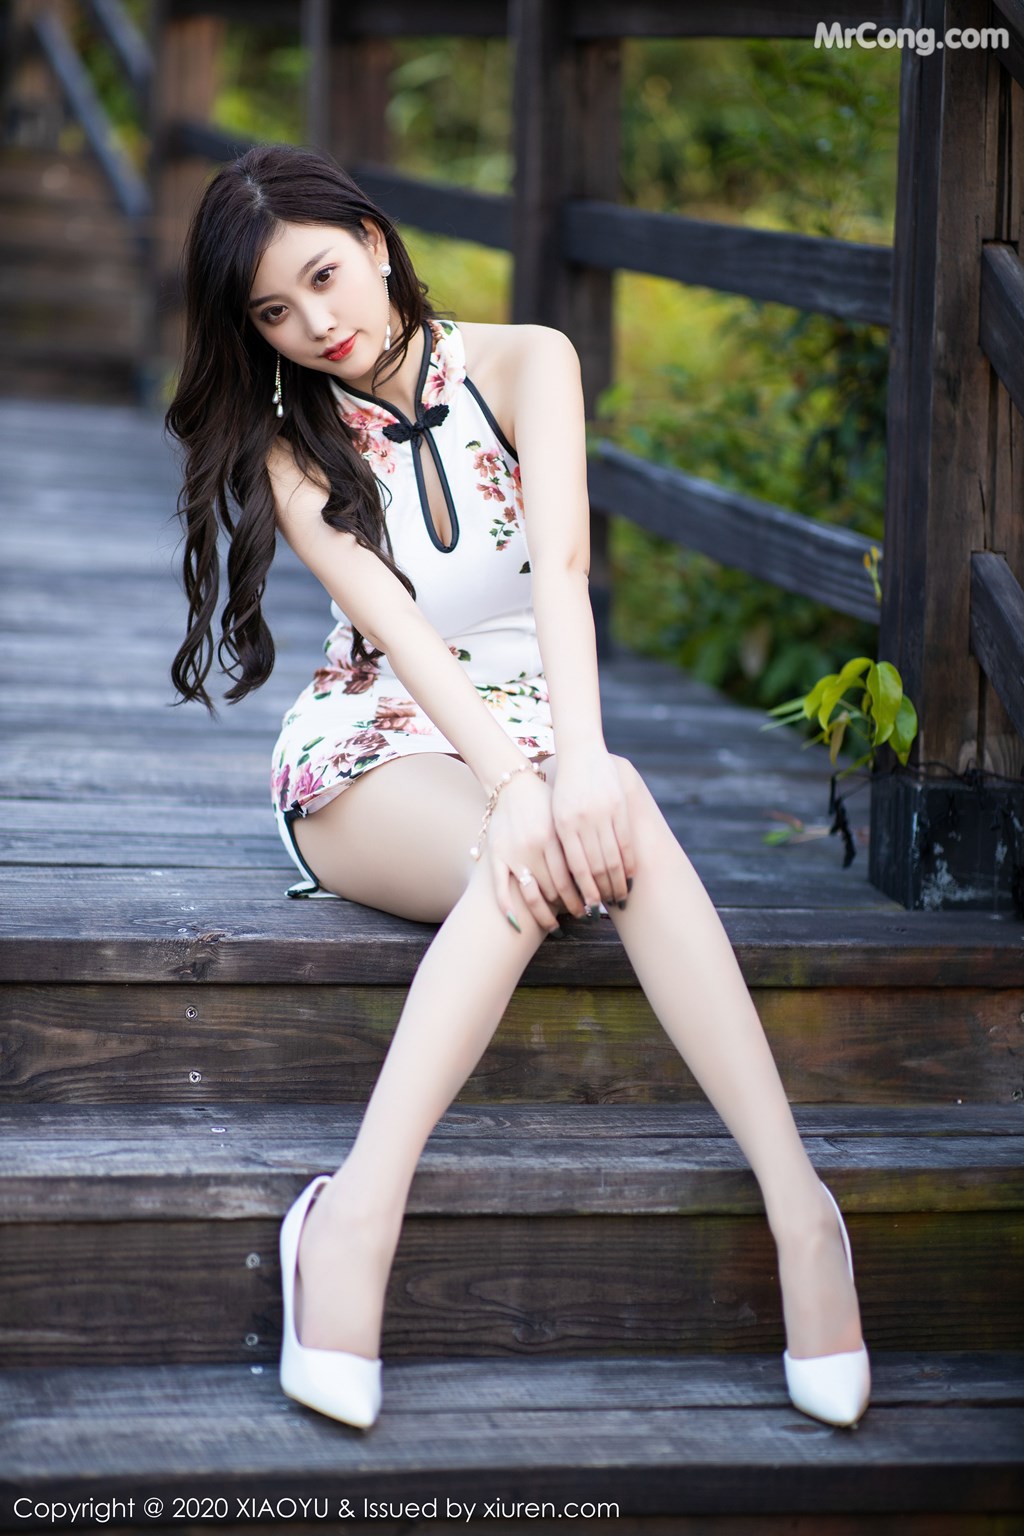 XiaoYu Vol.233: Yang Chen Chen (杨晨晨 sugar) (141 pictures)